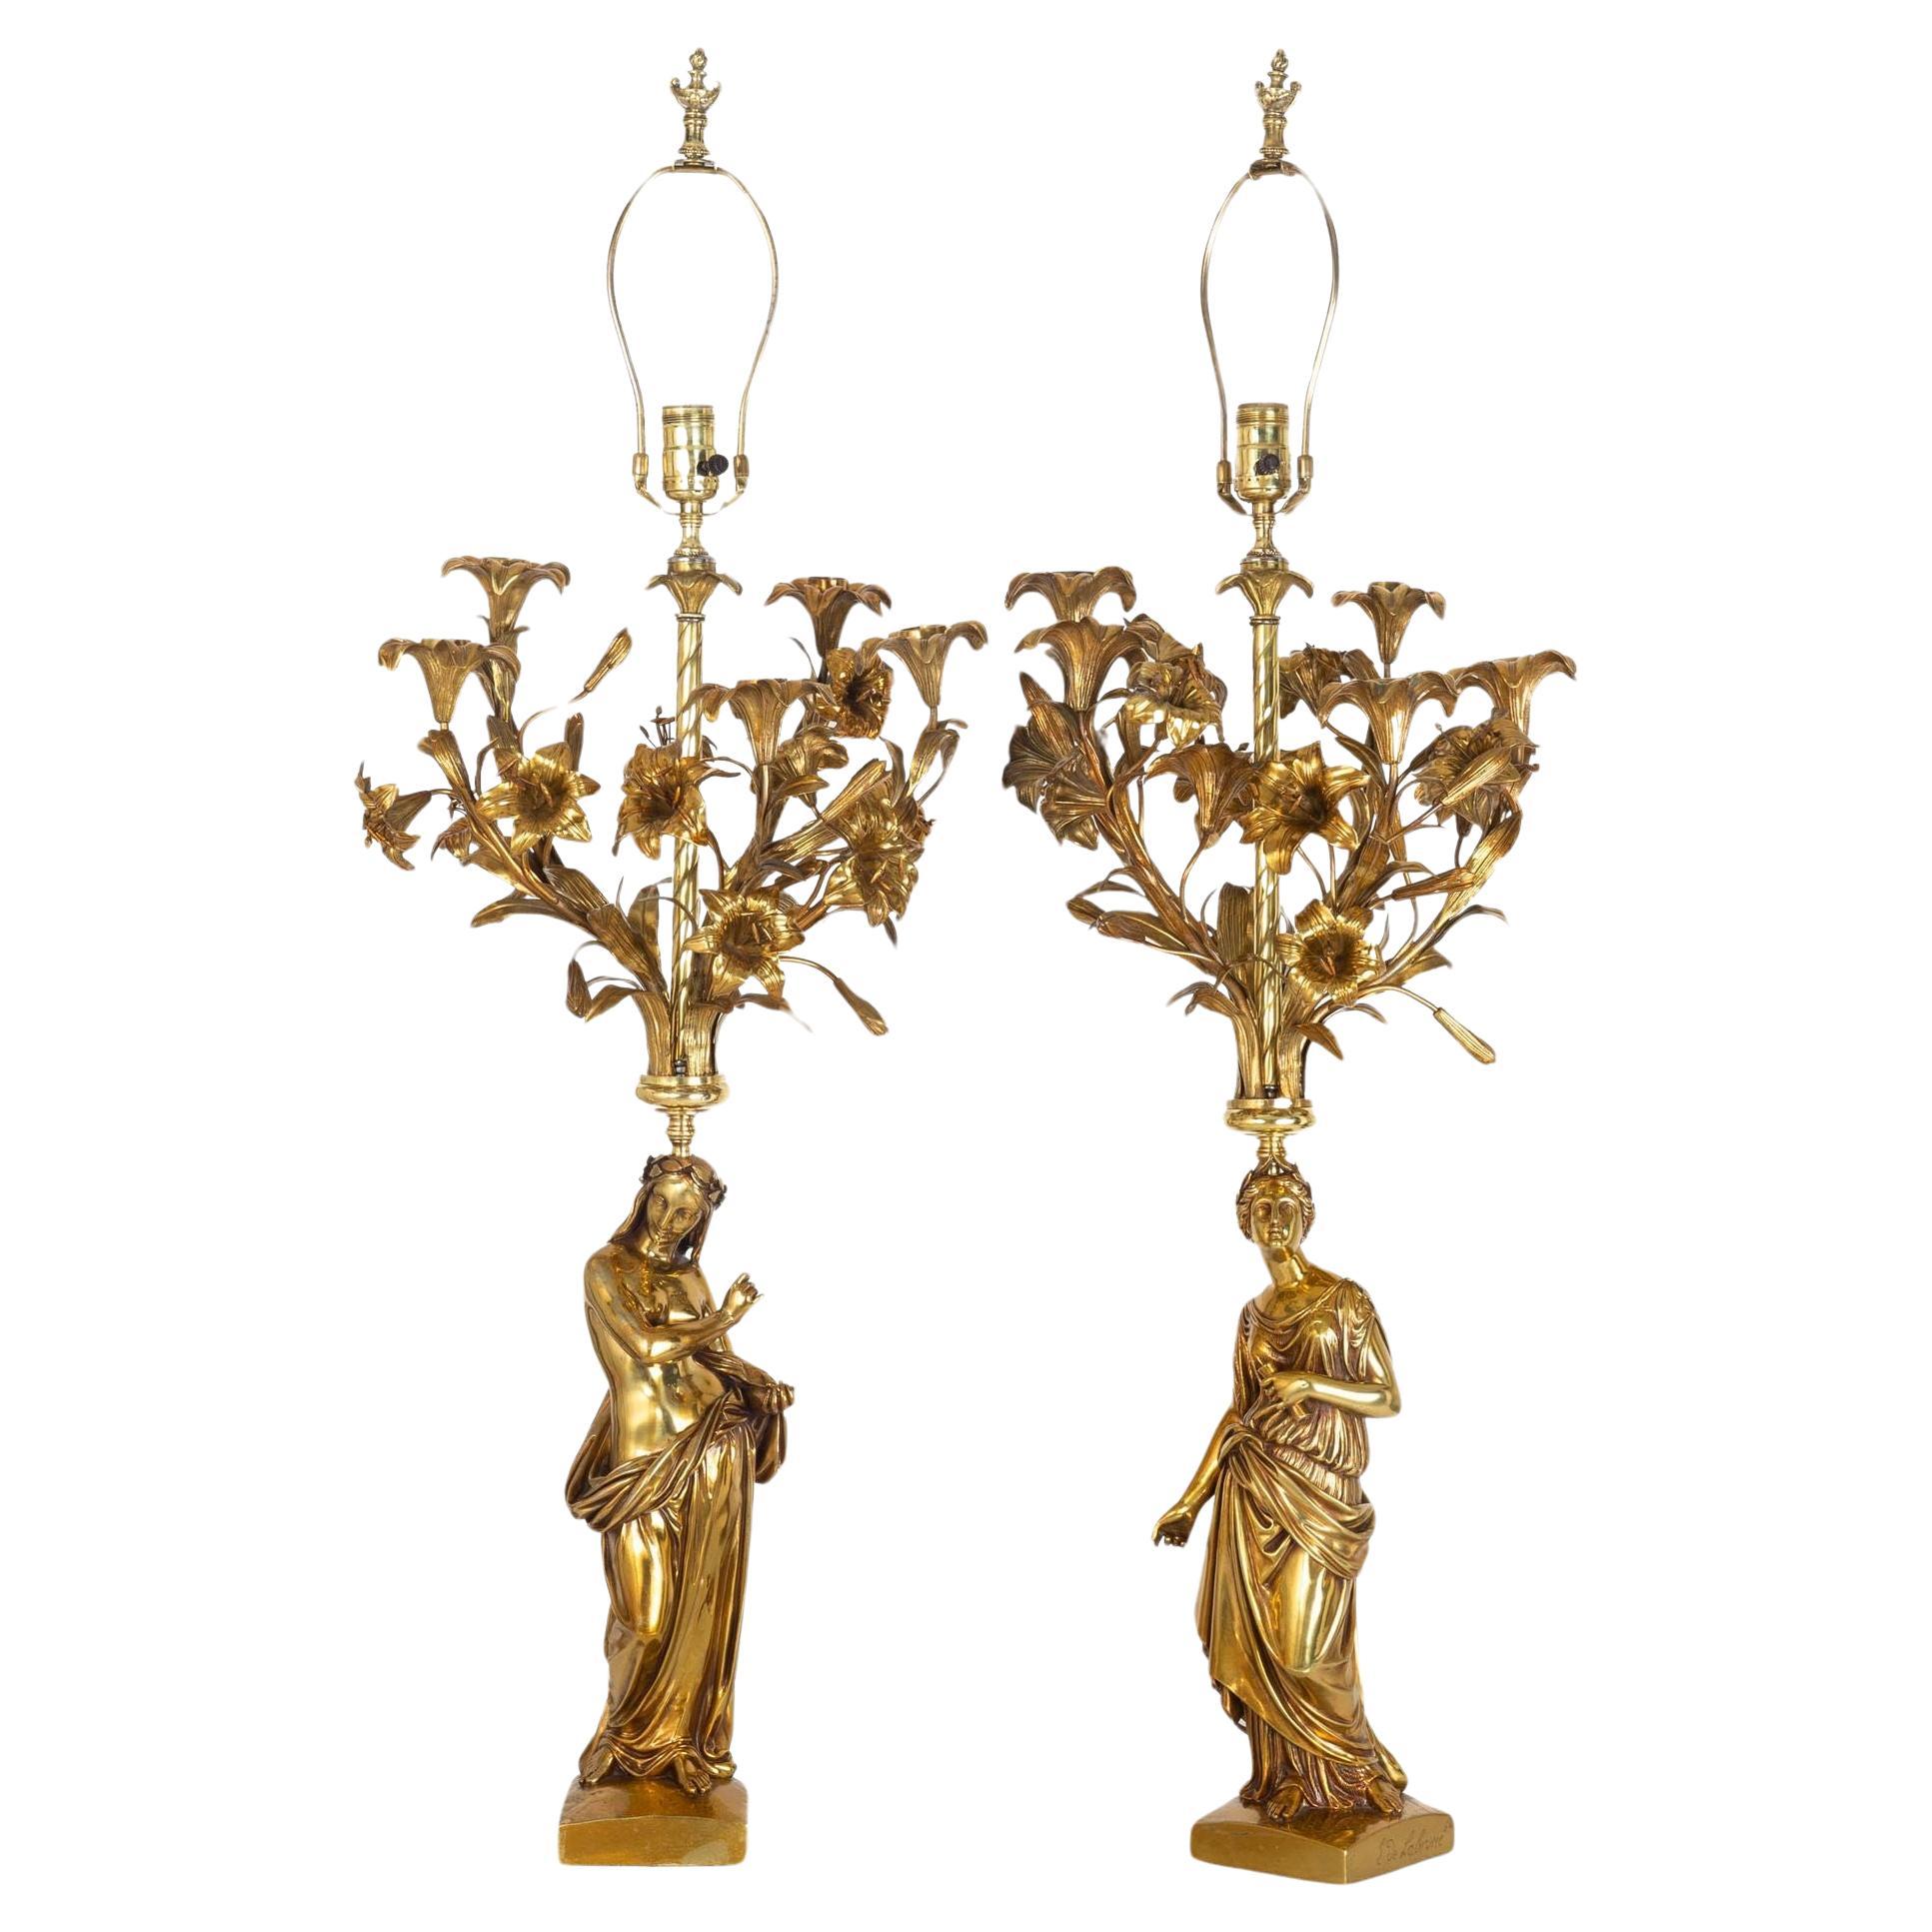 Pair of French “Poet & Musician” Bronze Sculpture Five-Light Candelabra For Sale